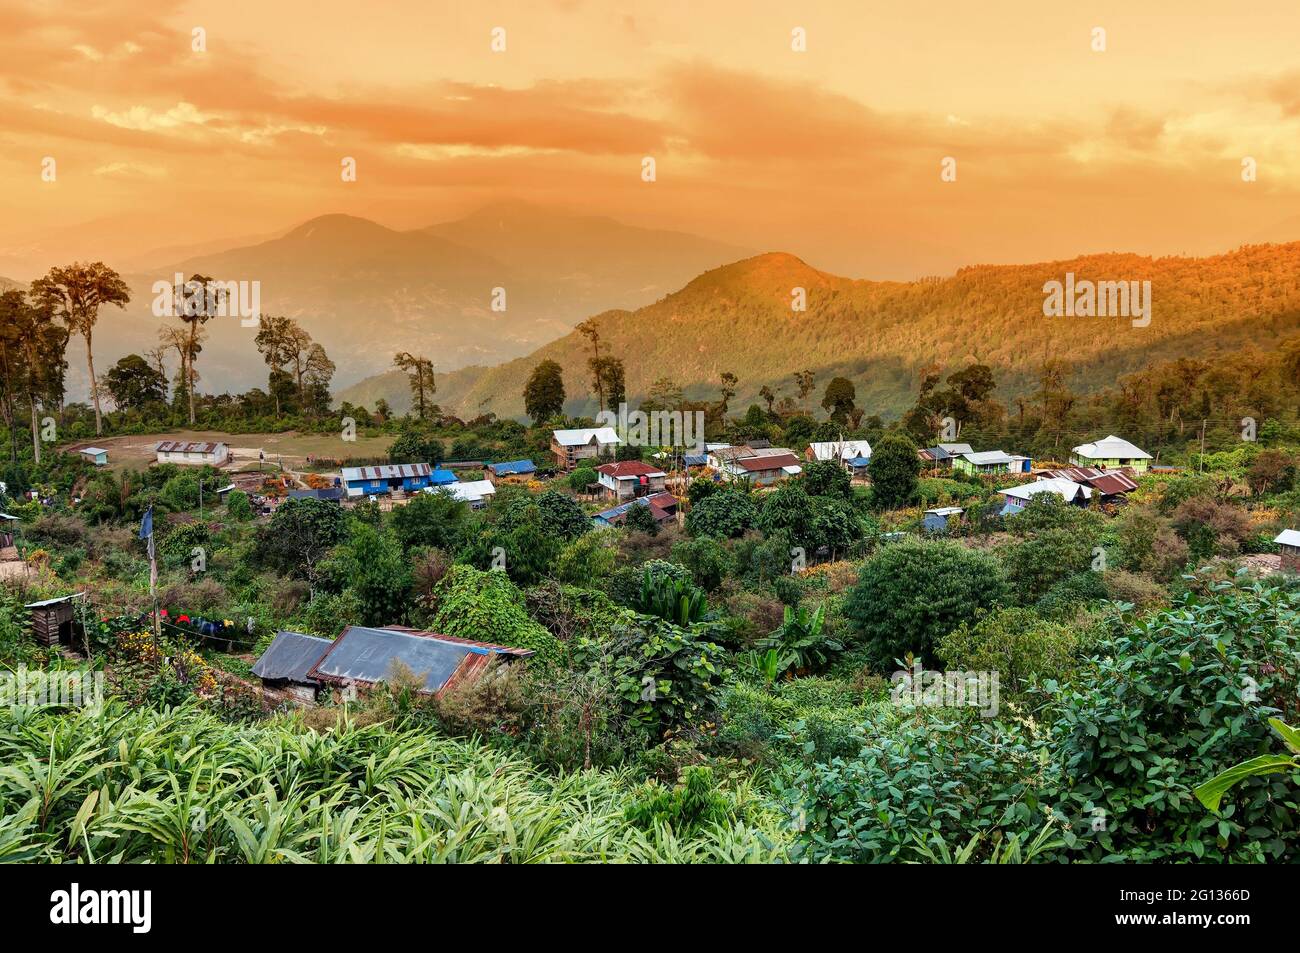 Beautiful view of Silerygaon Village with Kanchenjunga mountain range at the background, at orange colored dusk light, at Sikkim, India Stock Photo